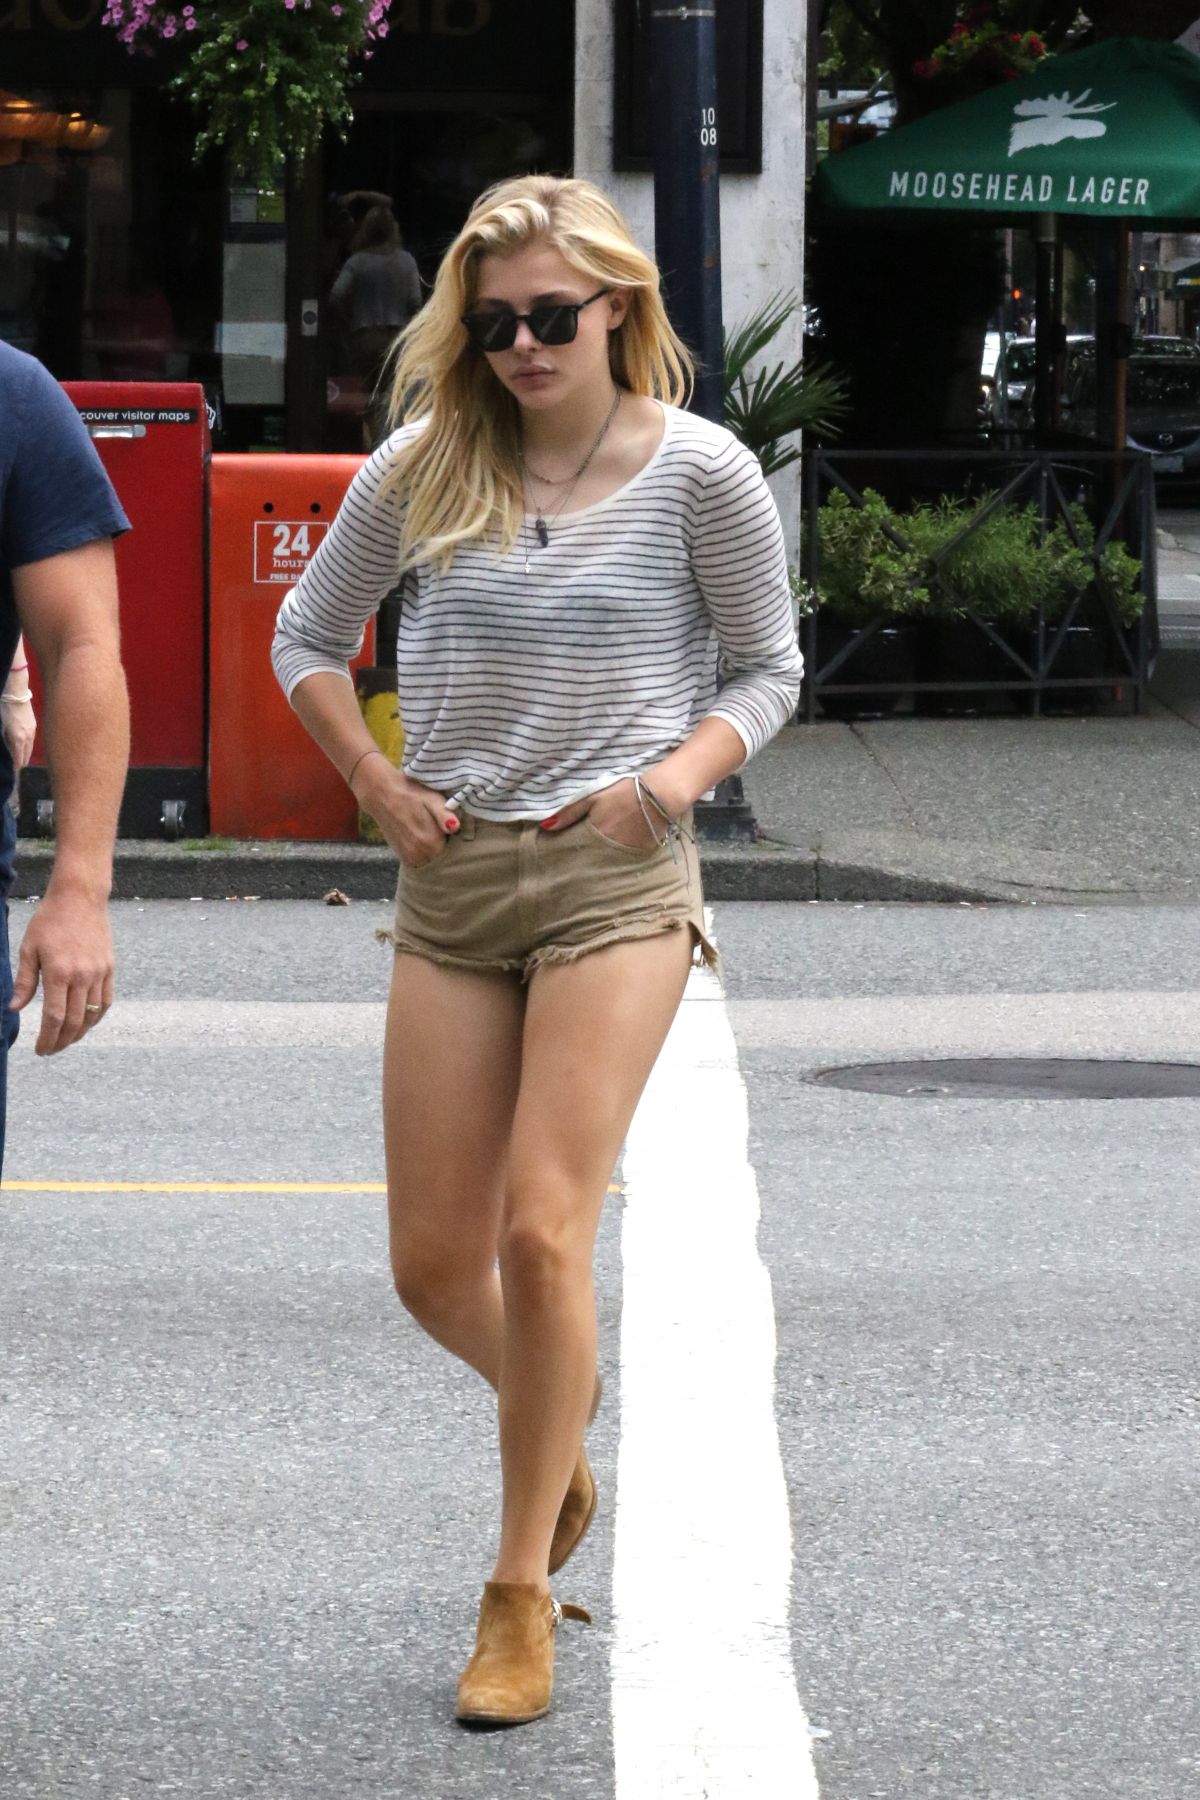 CHLOE MORETZ in Shorts Out and About in Vancouver 07/25/2015 – HawtCelebs